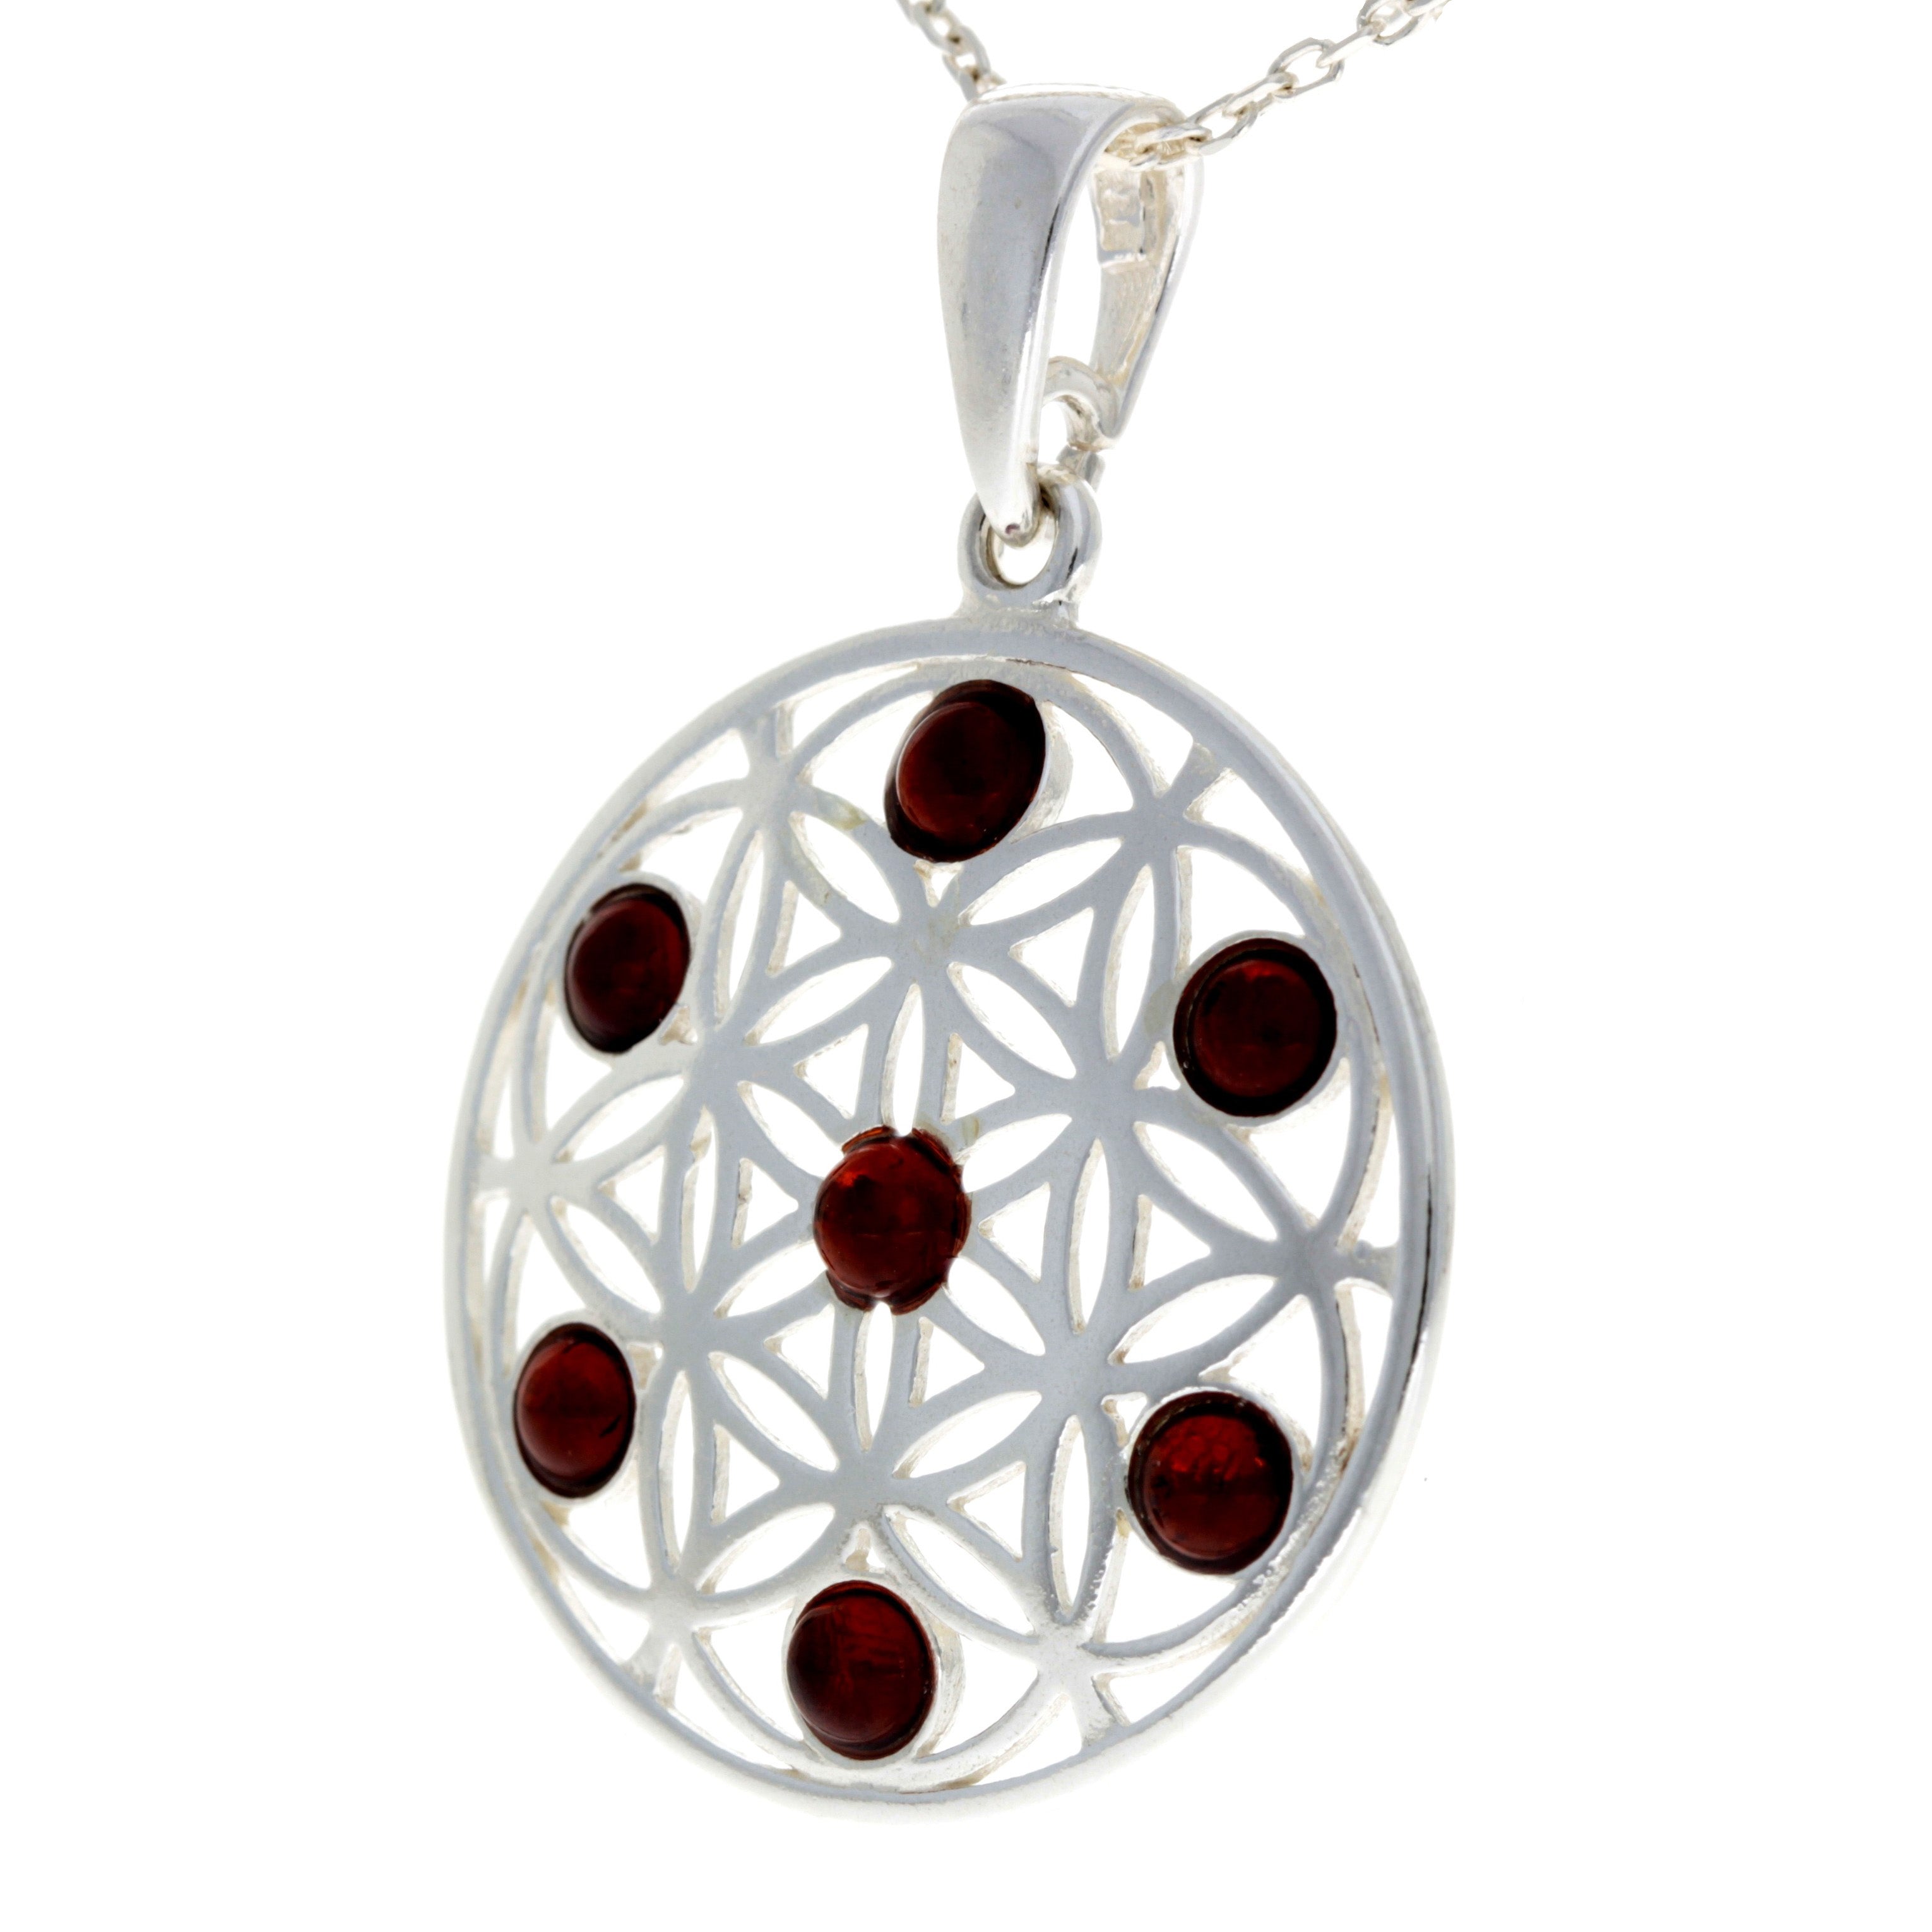 925 Sterling Silver Flower of Life Pendant set with Genuine Baltic Amber Gemstones - GL365